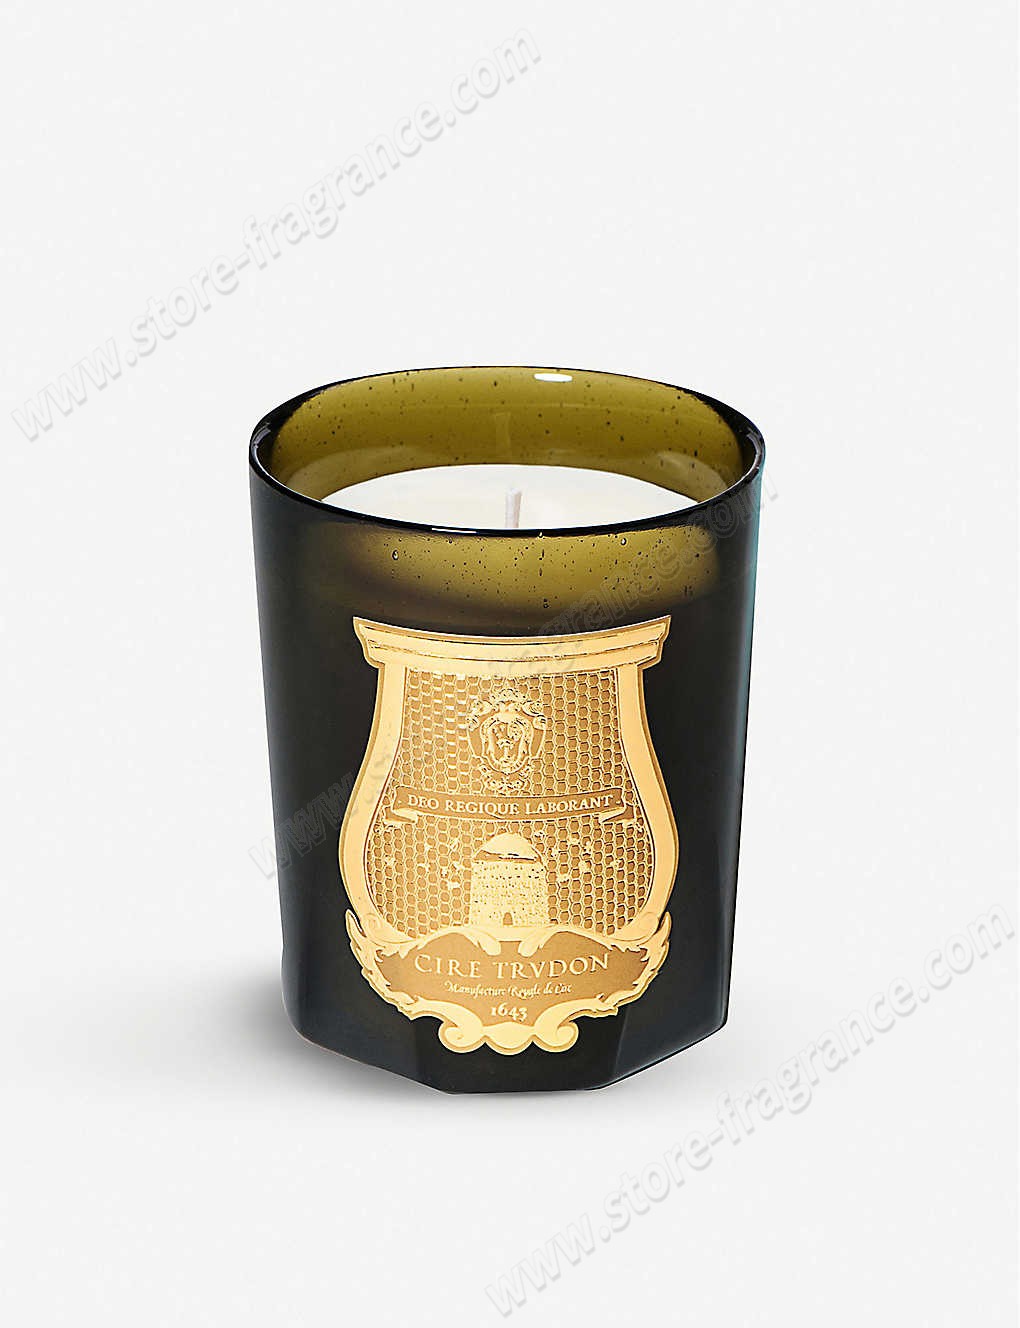 CIRE TRUDON/Madeleine scented candle 270g ✿ Discount Store - CIRE TRUDON/Madeleine scented candle 270g ✿ Discount Store